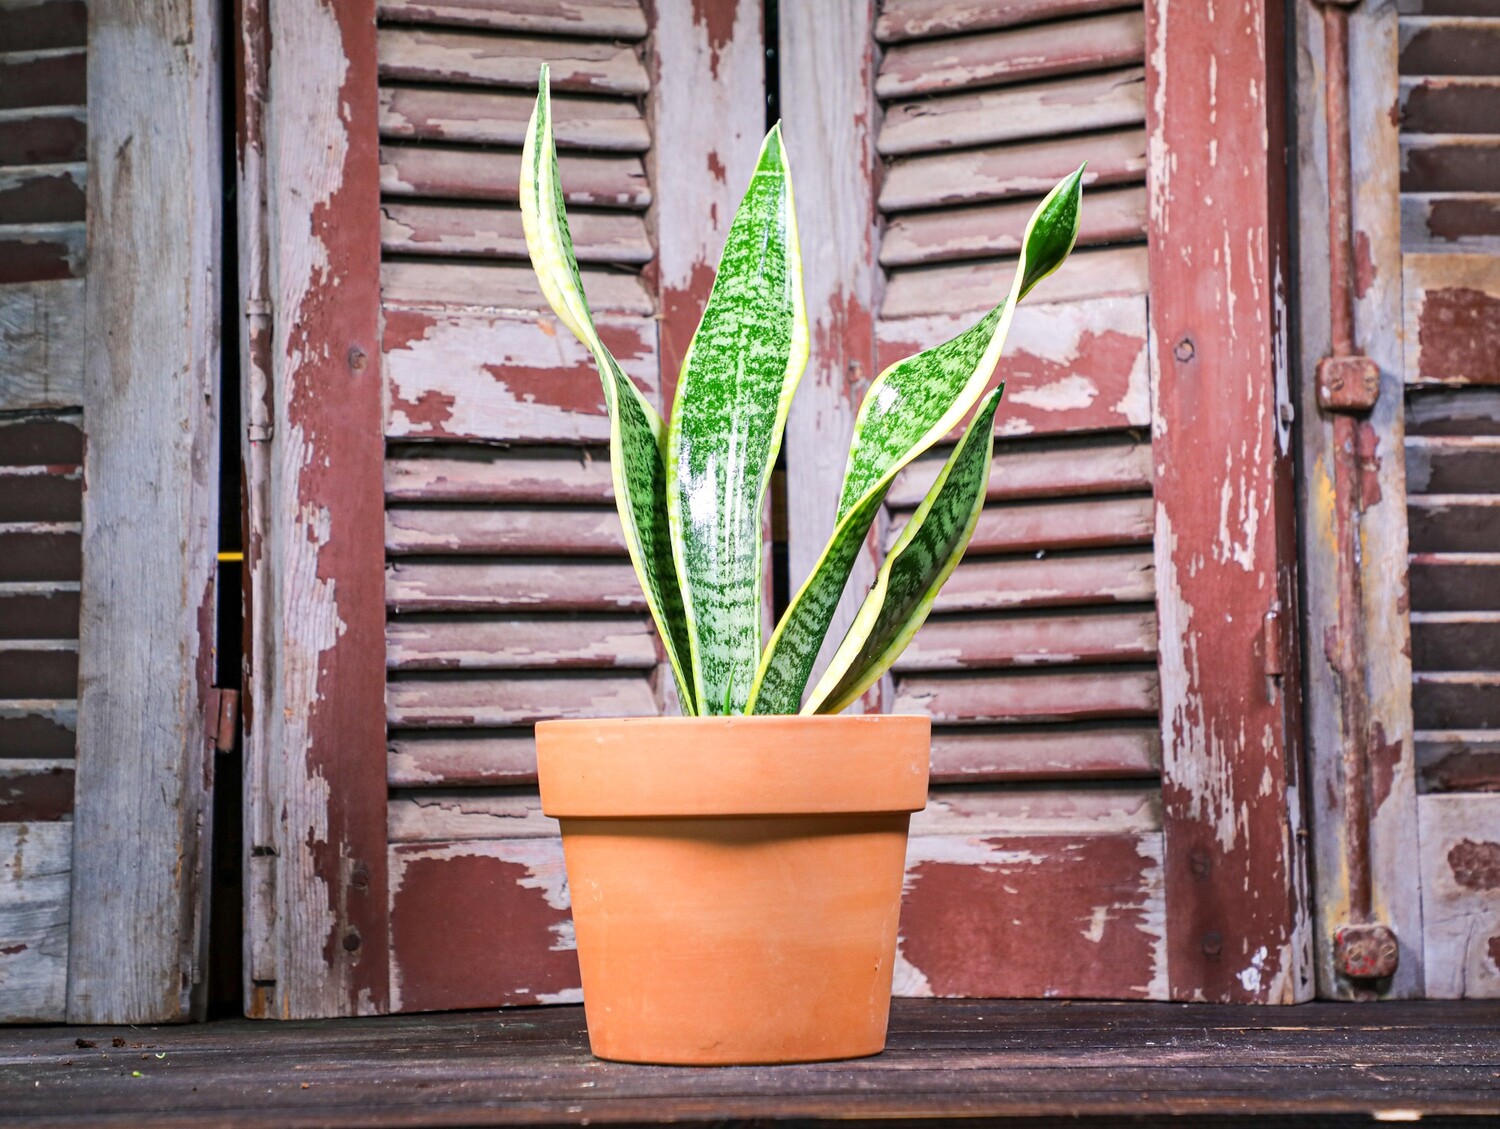 Sansevieria Trifasciata (Plant) - Nature by Marc Beyrouthy